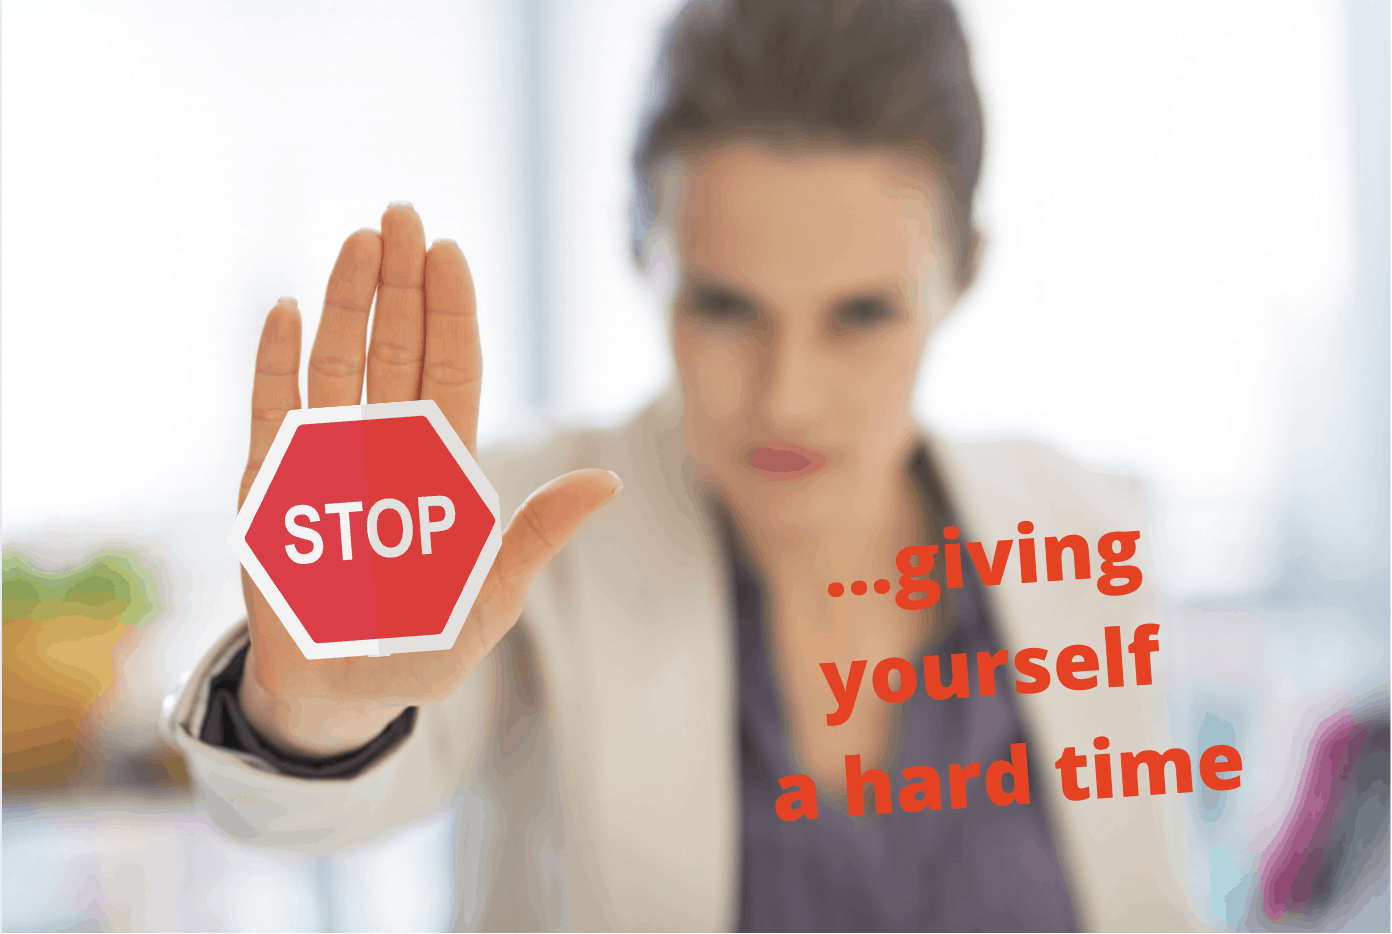 STOP giving yourself a hard time